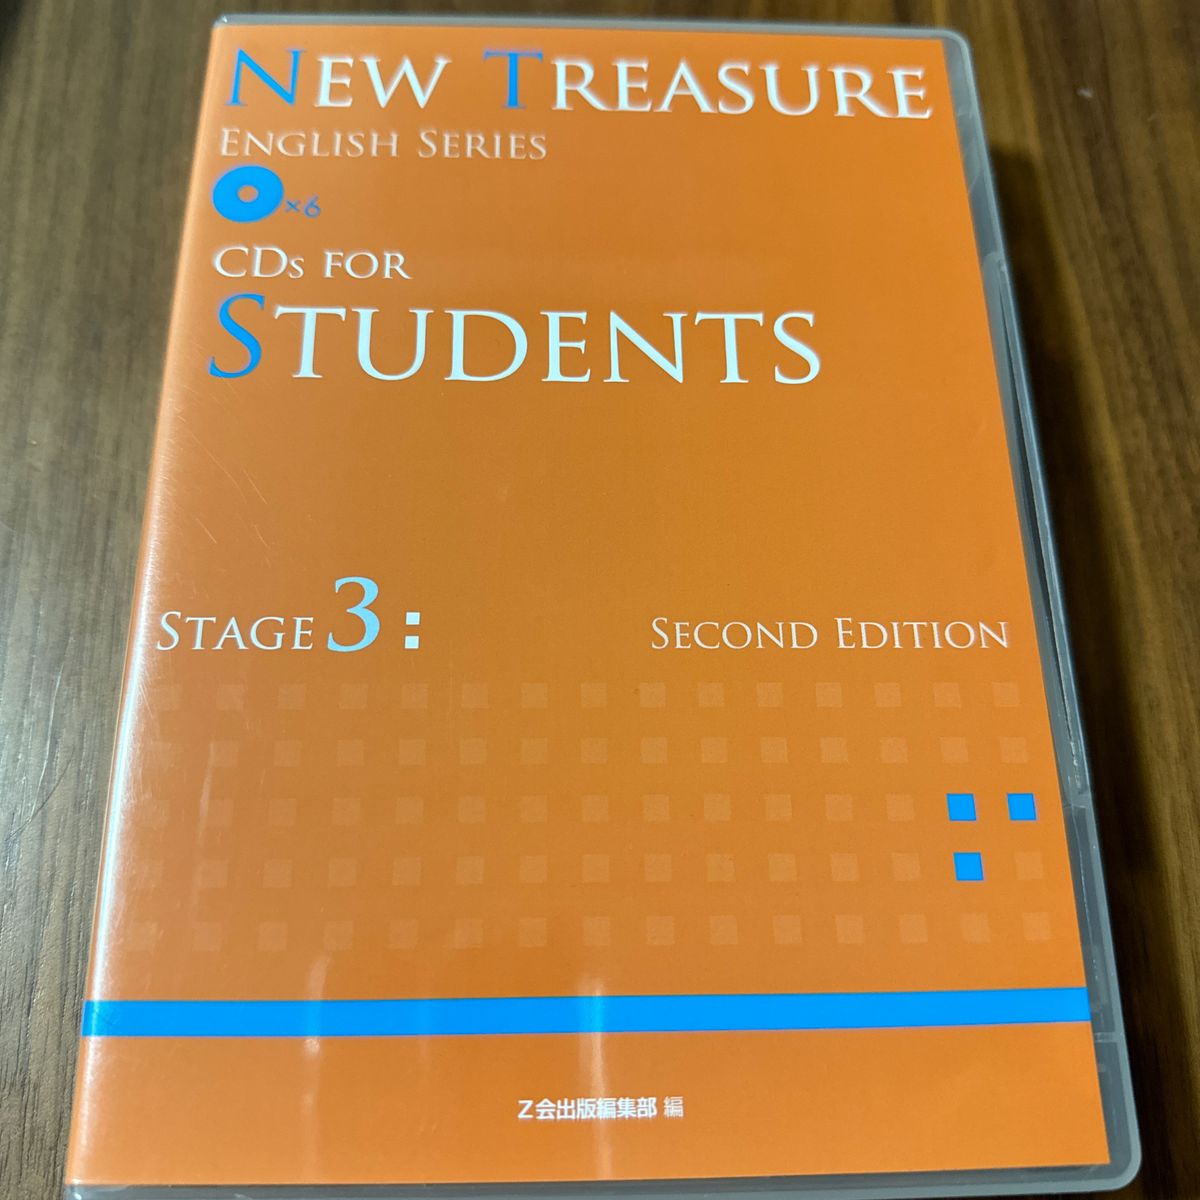 NEW TREASURE ENGLISH SERIES CDs FOR STUDENTS SECOND STAGE 3